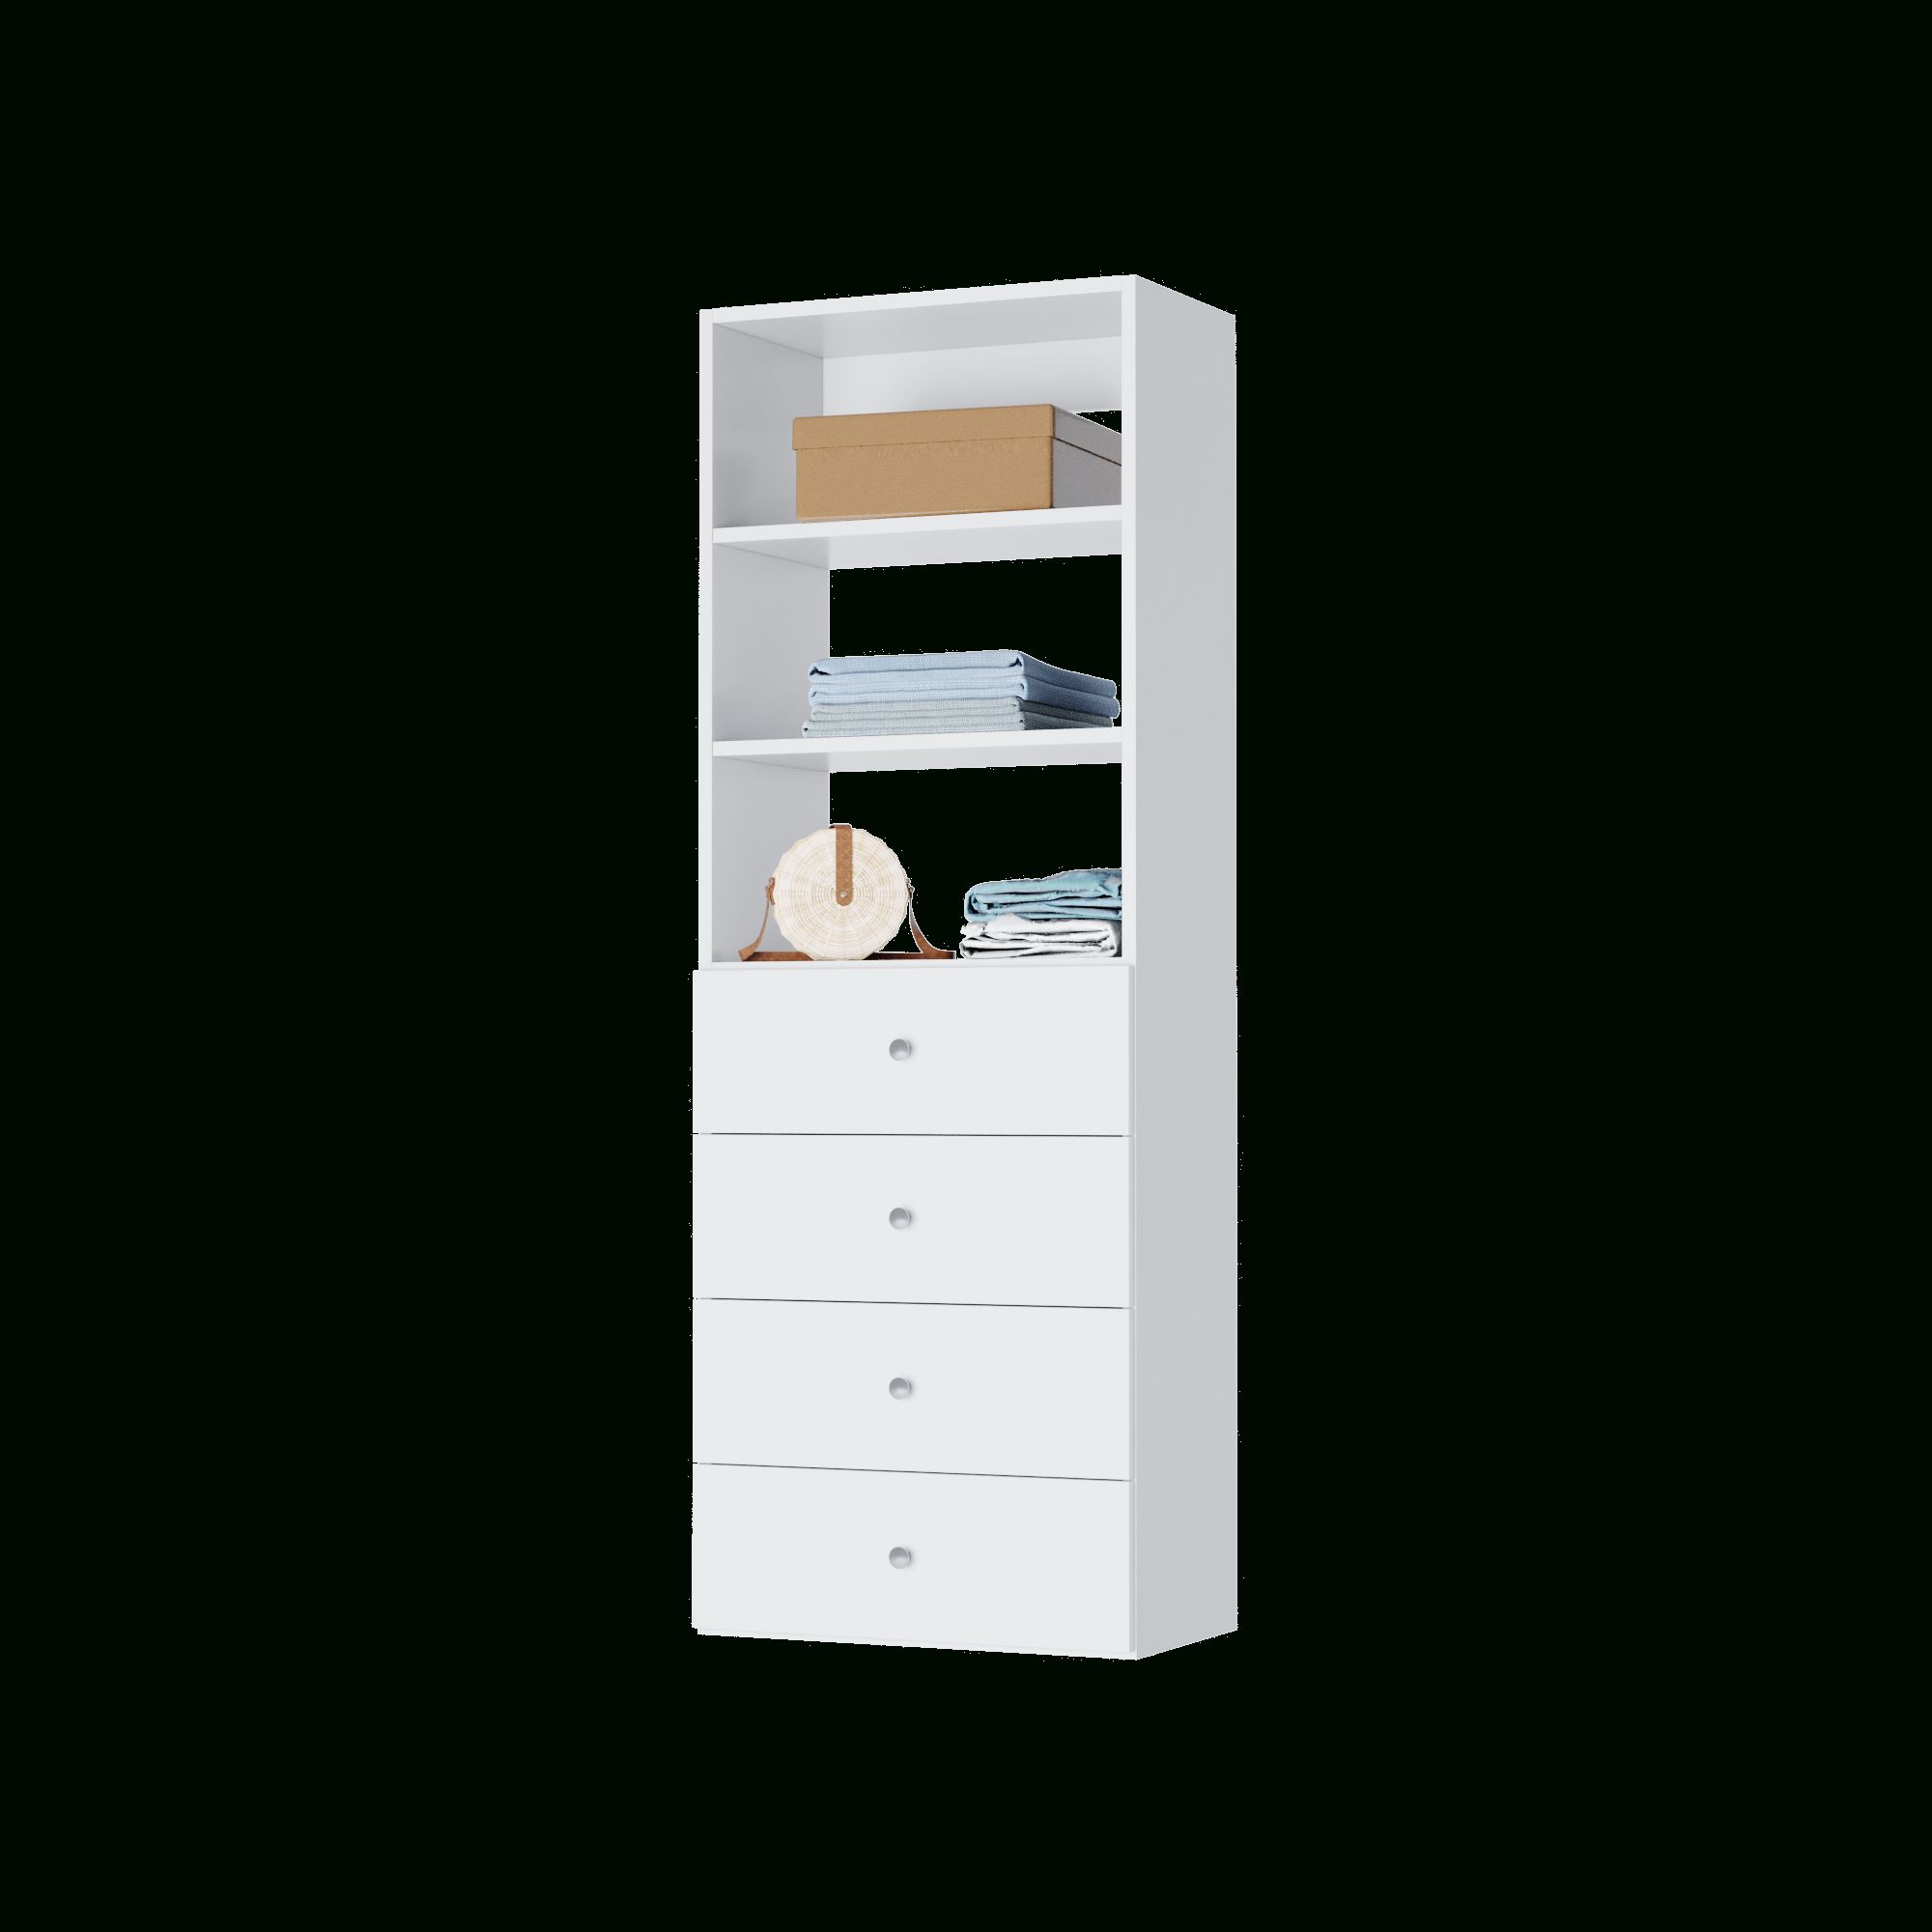 Closet Shelf Tower With Drawers | Fast & Free Shipping Within Wardrobes With 3 Shelving Towers (View 10 of 15)